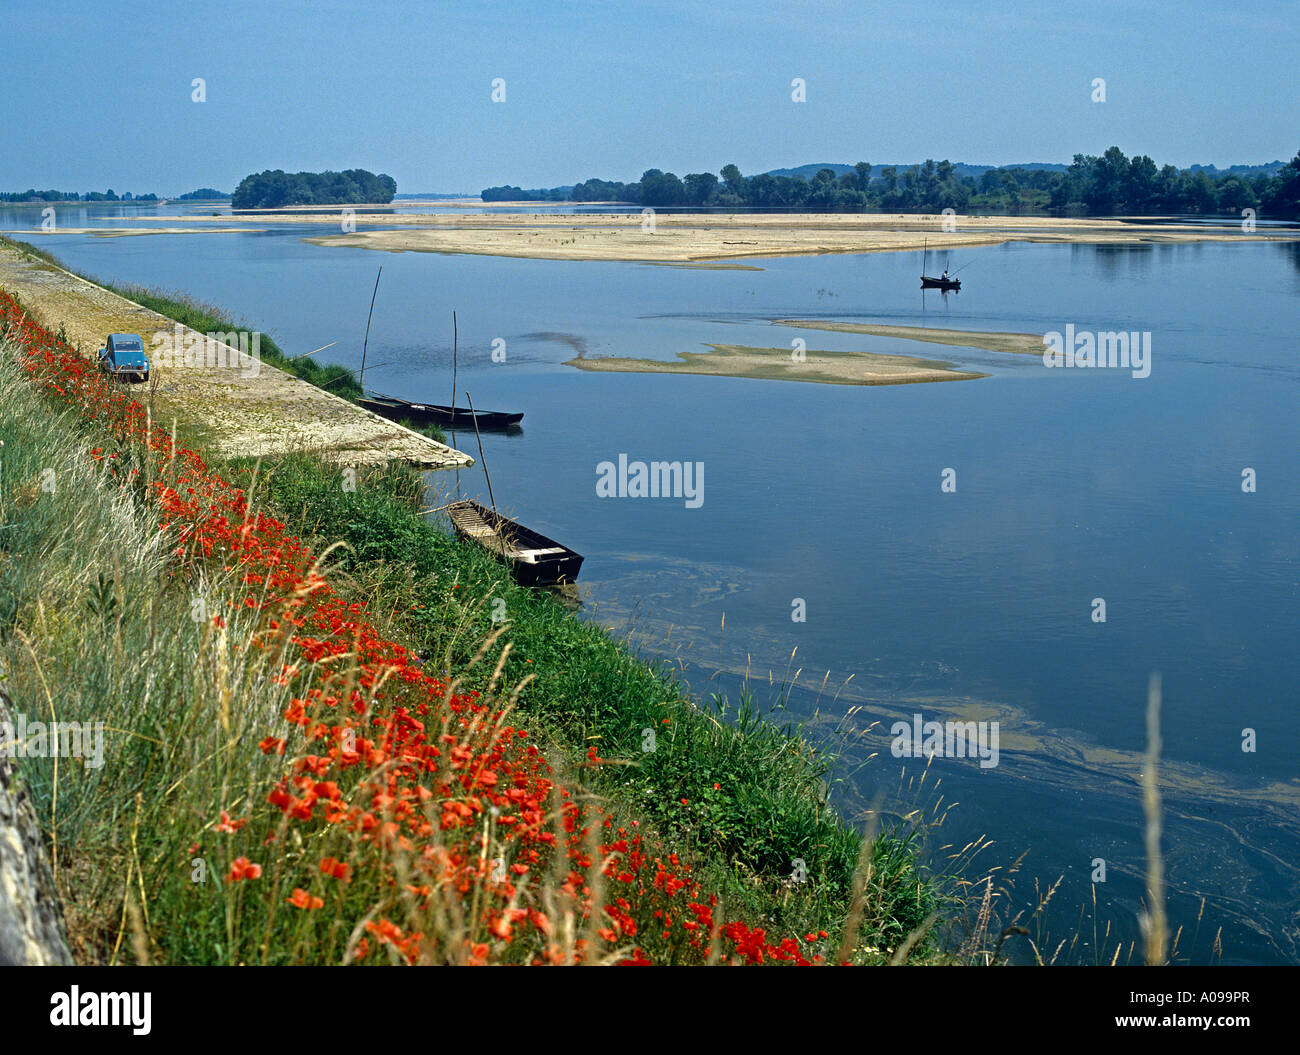 Early summer fishing on the River Loire west of Saumur Sandbanks exposed and wild poppies in bloom by the shore Stock Photo